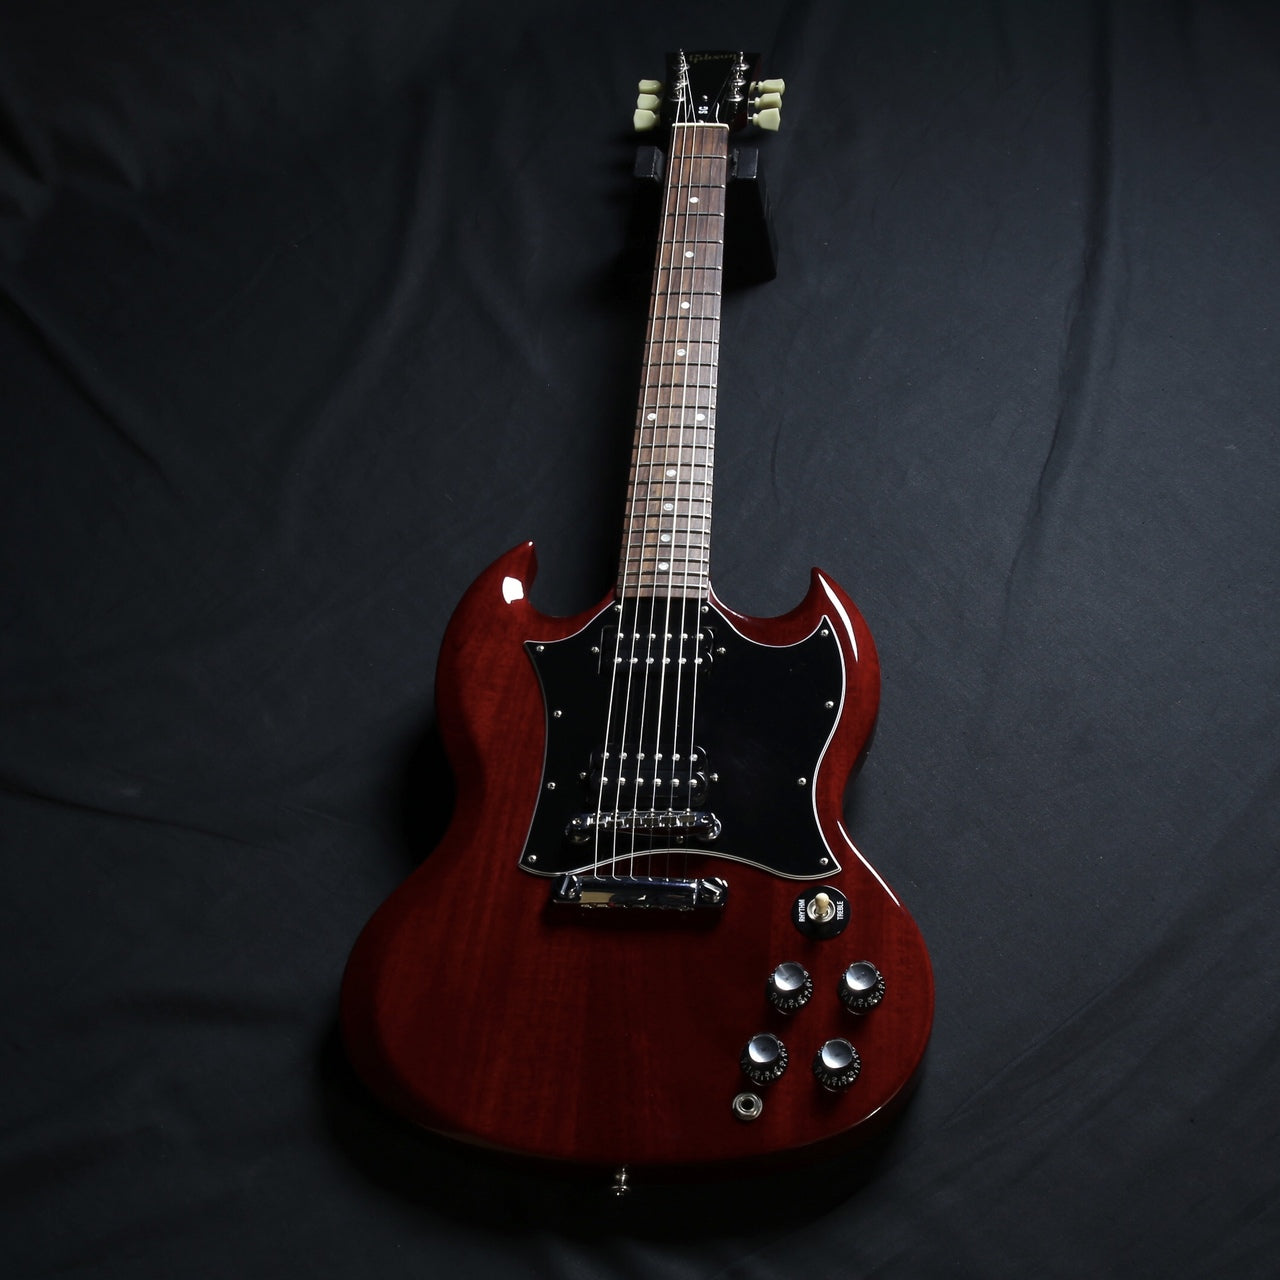 Gibson SG special Limited edition錆などはありますでしょうか